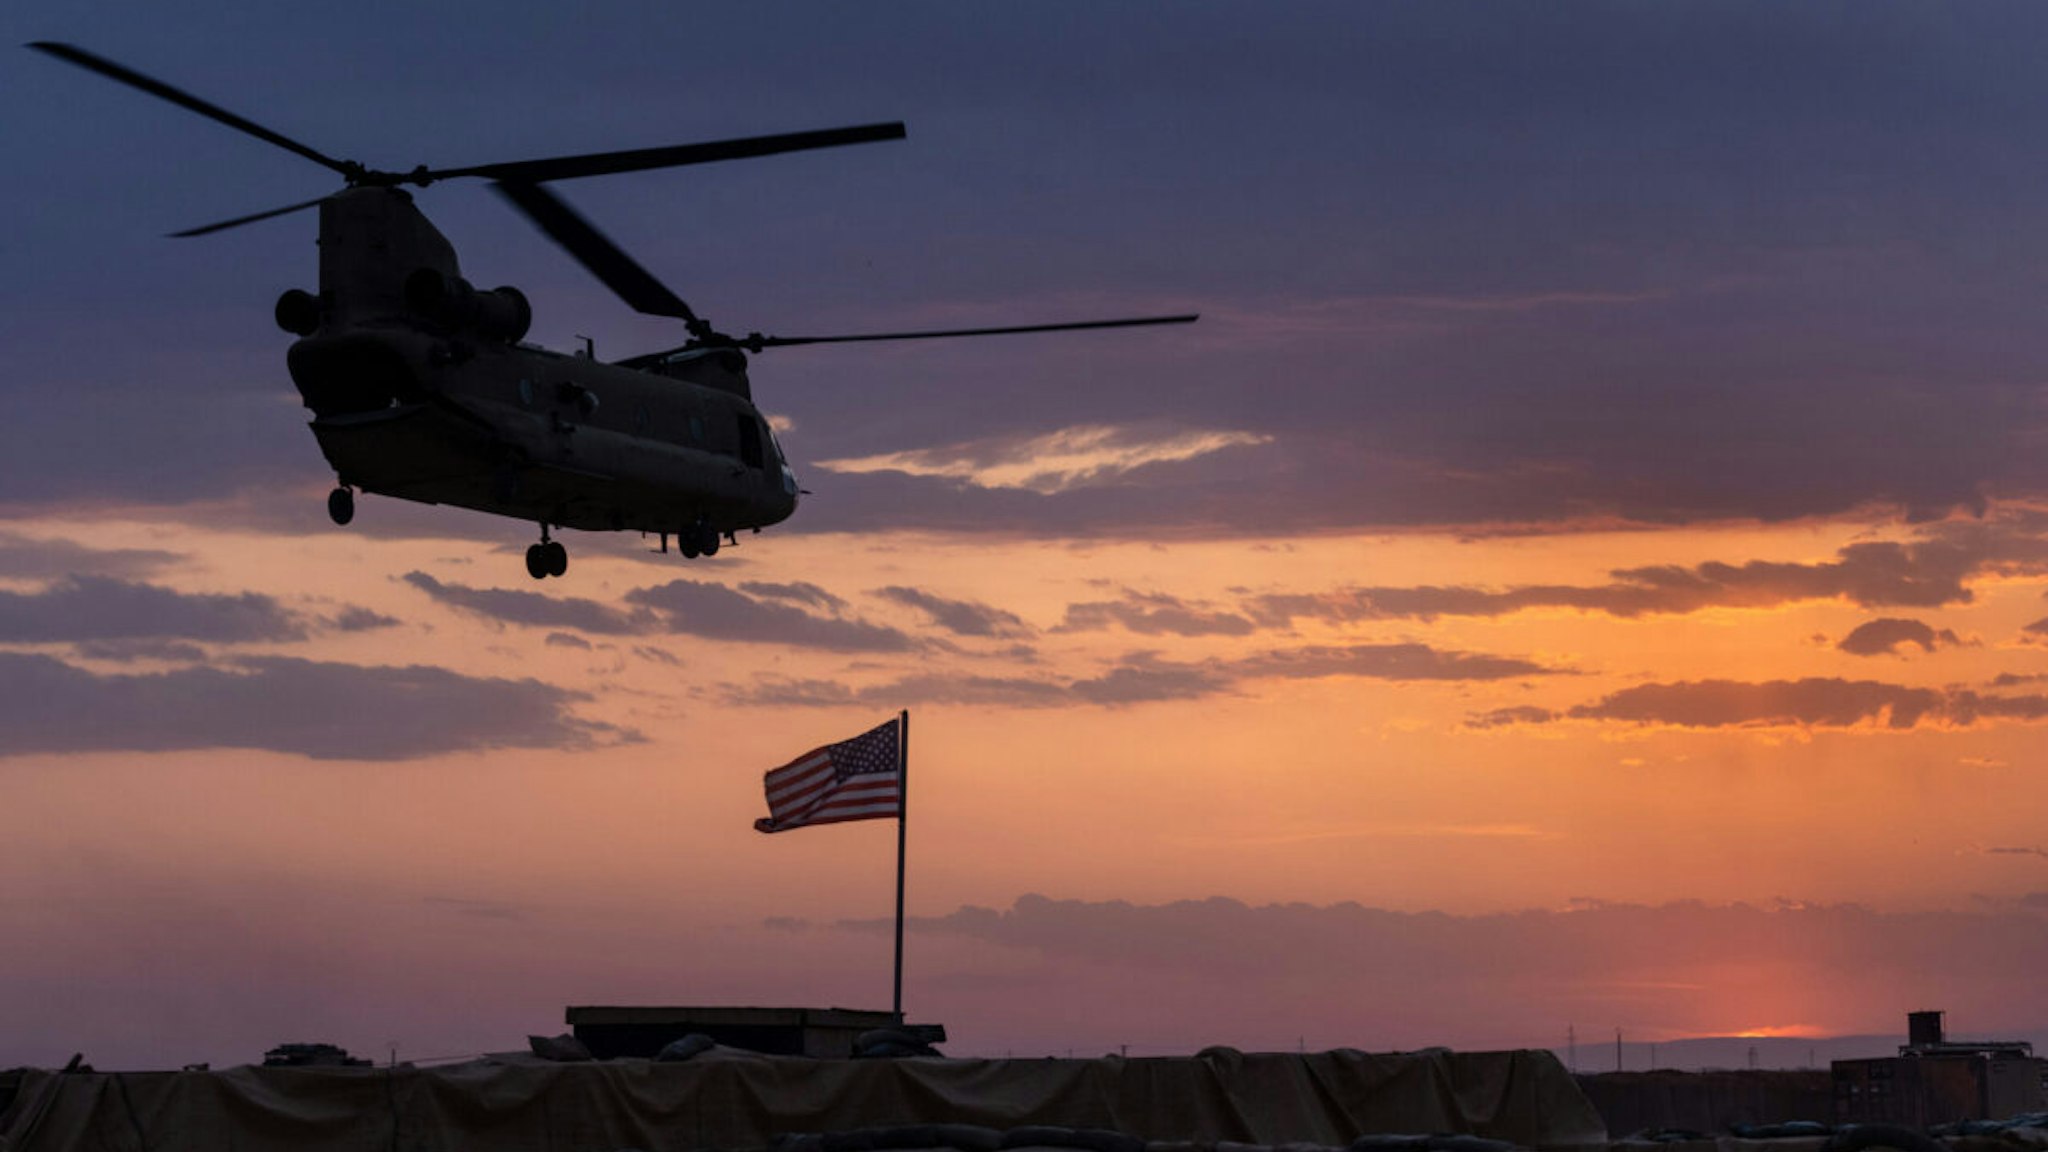 A U.S. Army CH-47 Chinook helicopter takes off at sunset while transporting American troops out of a remote combat outpost known as RLZ on May 25, 2021 near the Turkish border in northeastern Syria